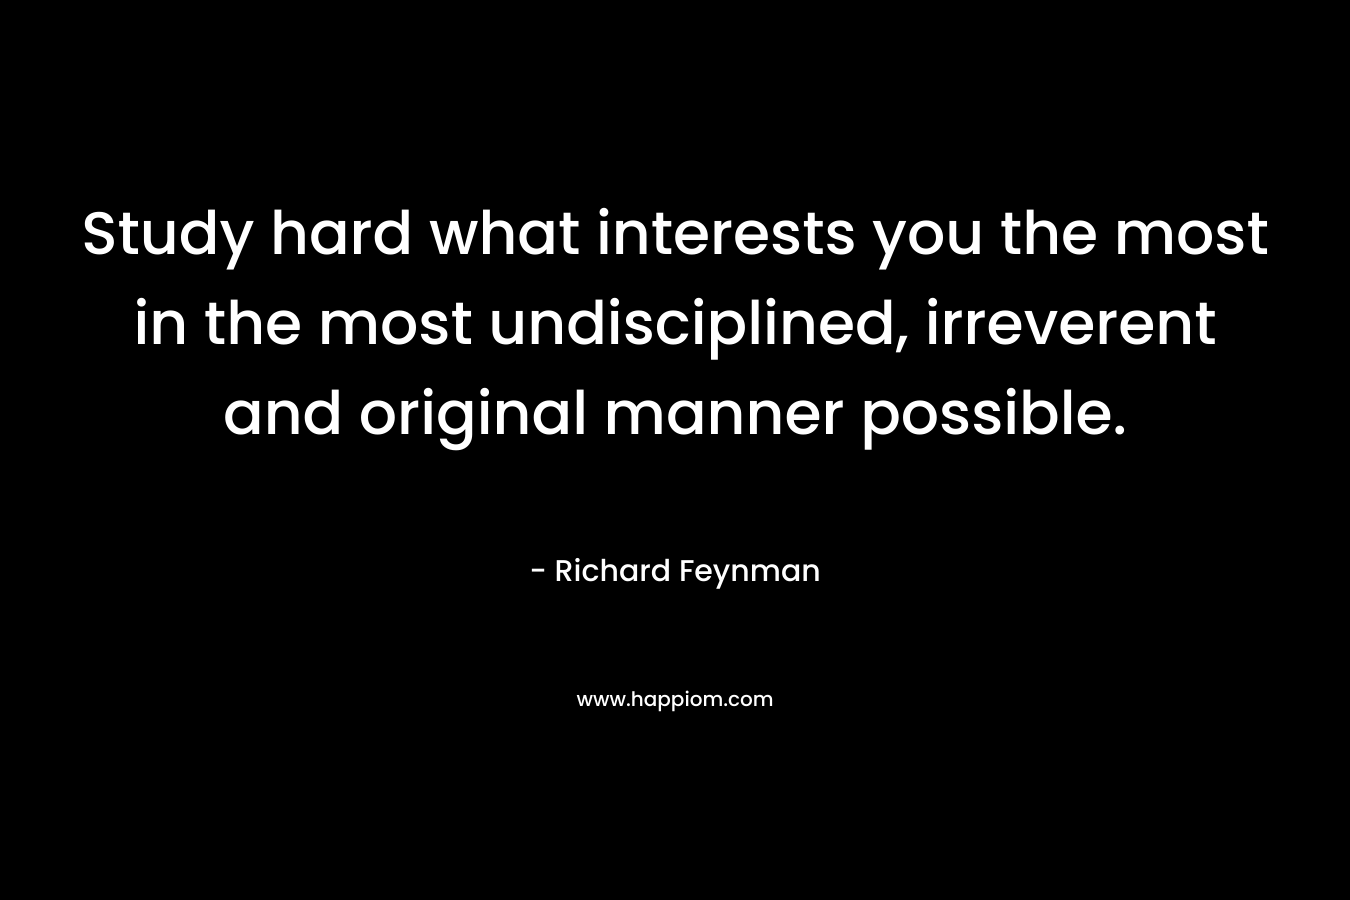 Study hard what interests you the most in the most undisciplined, irreverent and original manner possible. – Richard Feynman